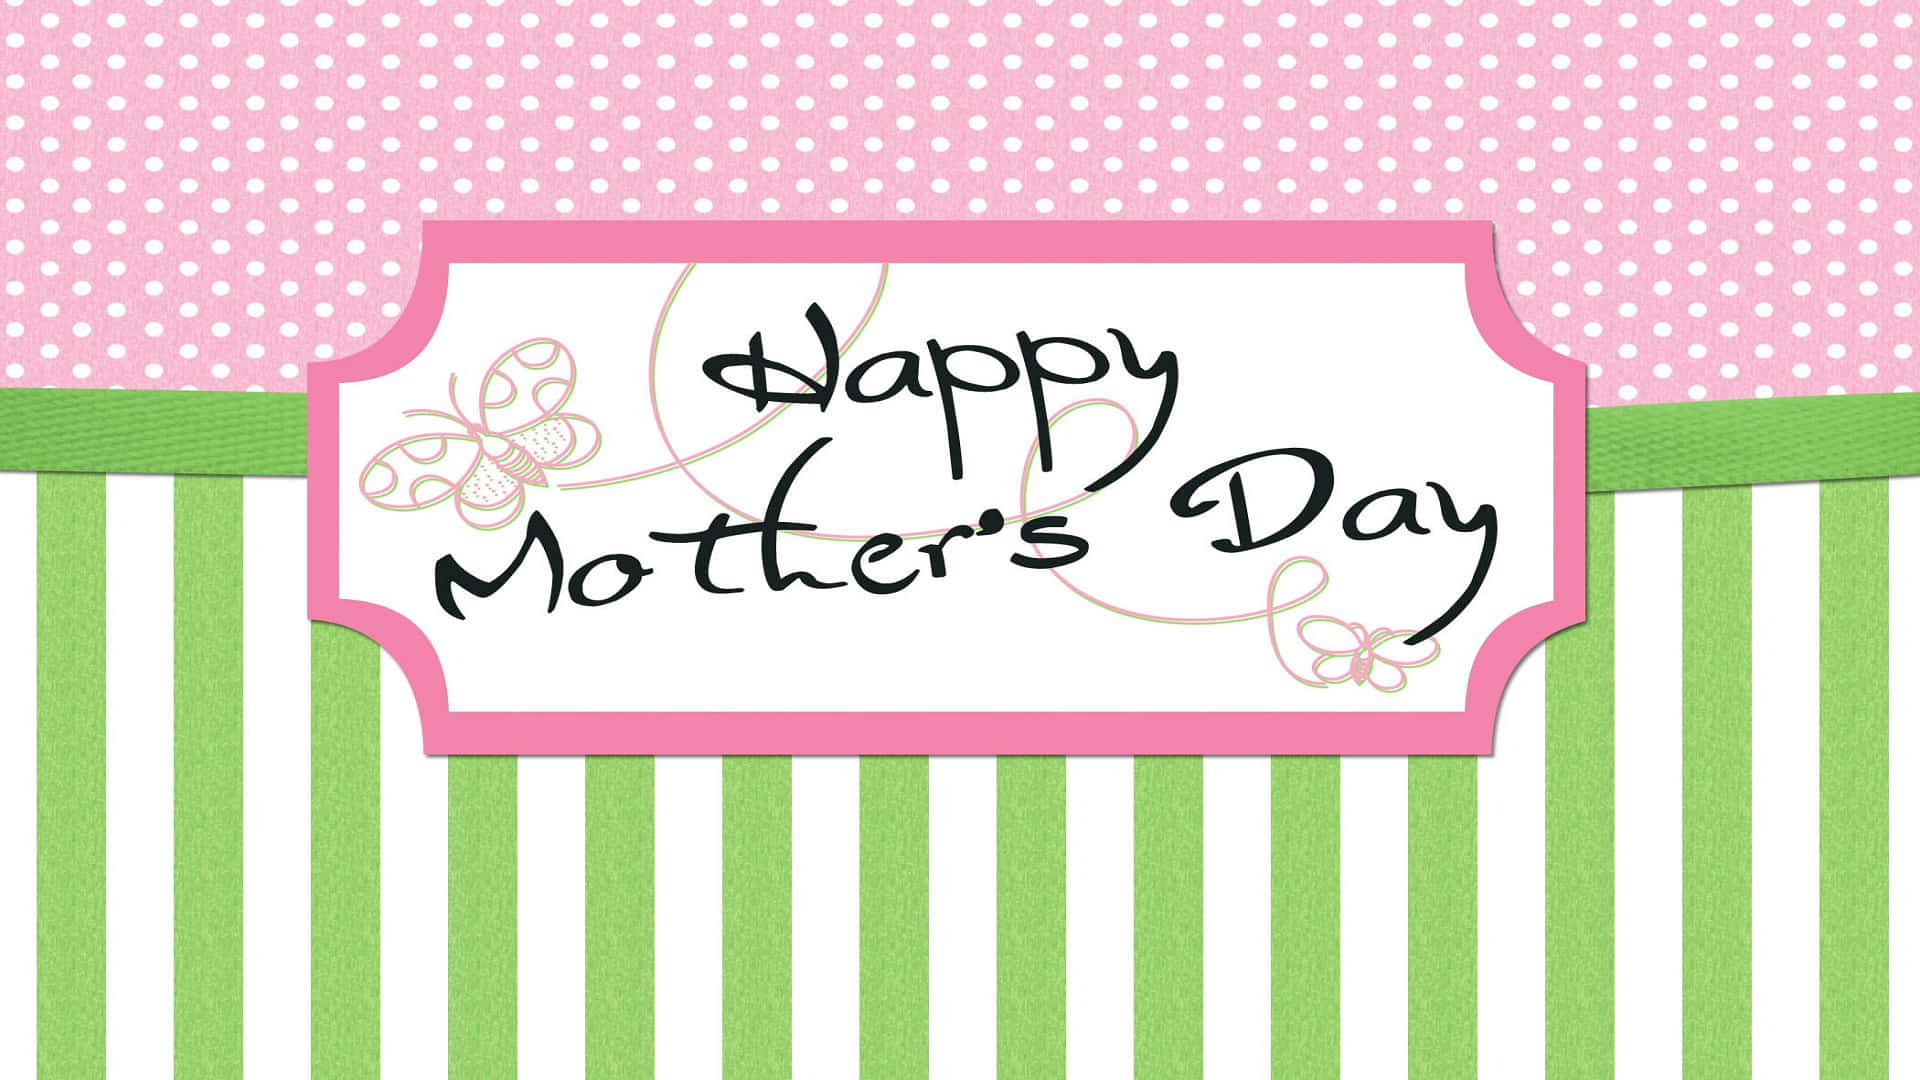 Happy Mothers Day Green And Pink Background Hd Wallpaper